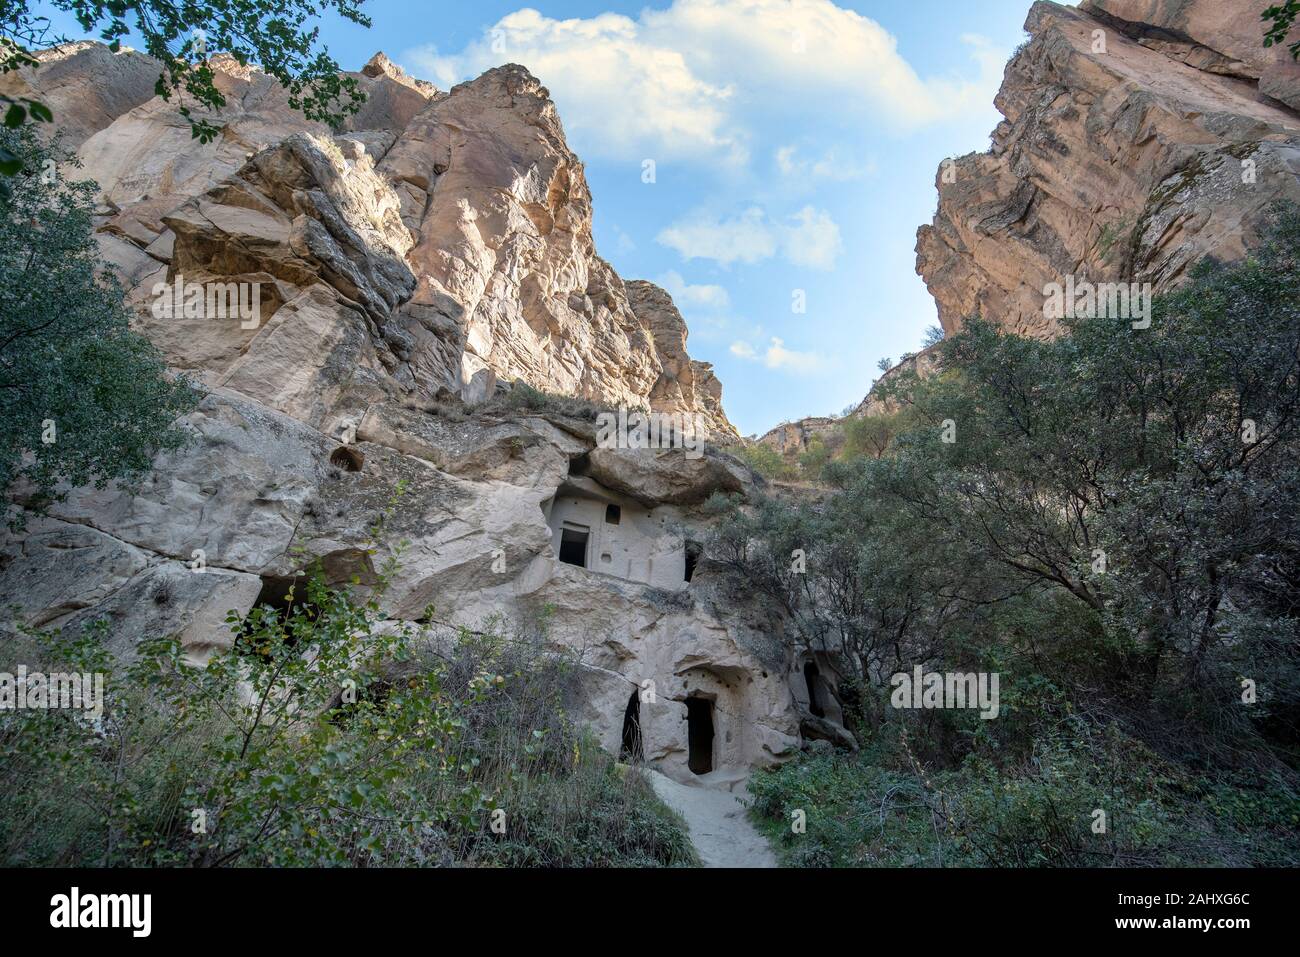 The Ihlara Valley or Peristrema Valley or Ihlara Vadisi is a canyon in the southwest of the Turkish region of Cappadocia. Aksaray Province, Turkey Stock Photo